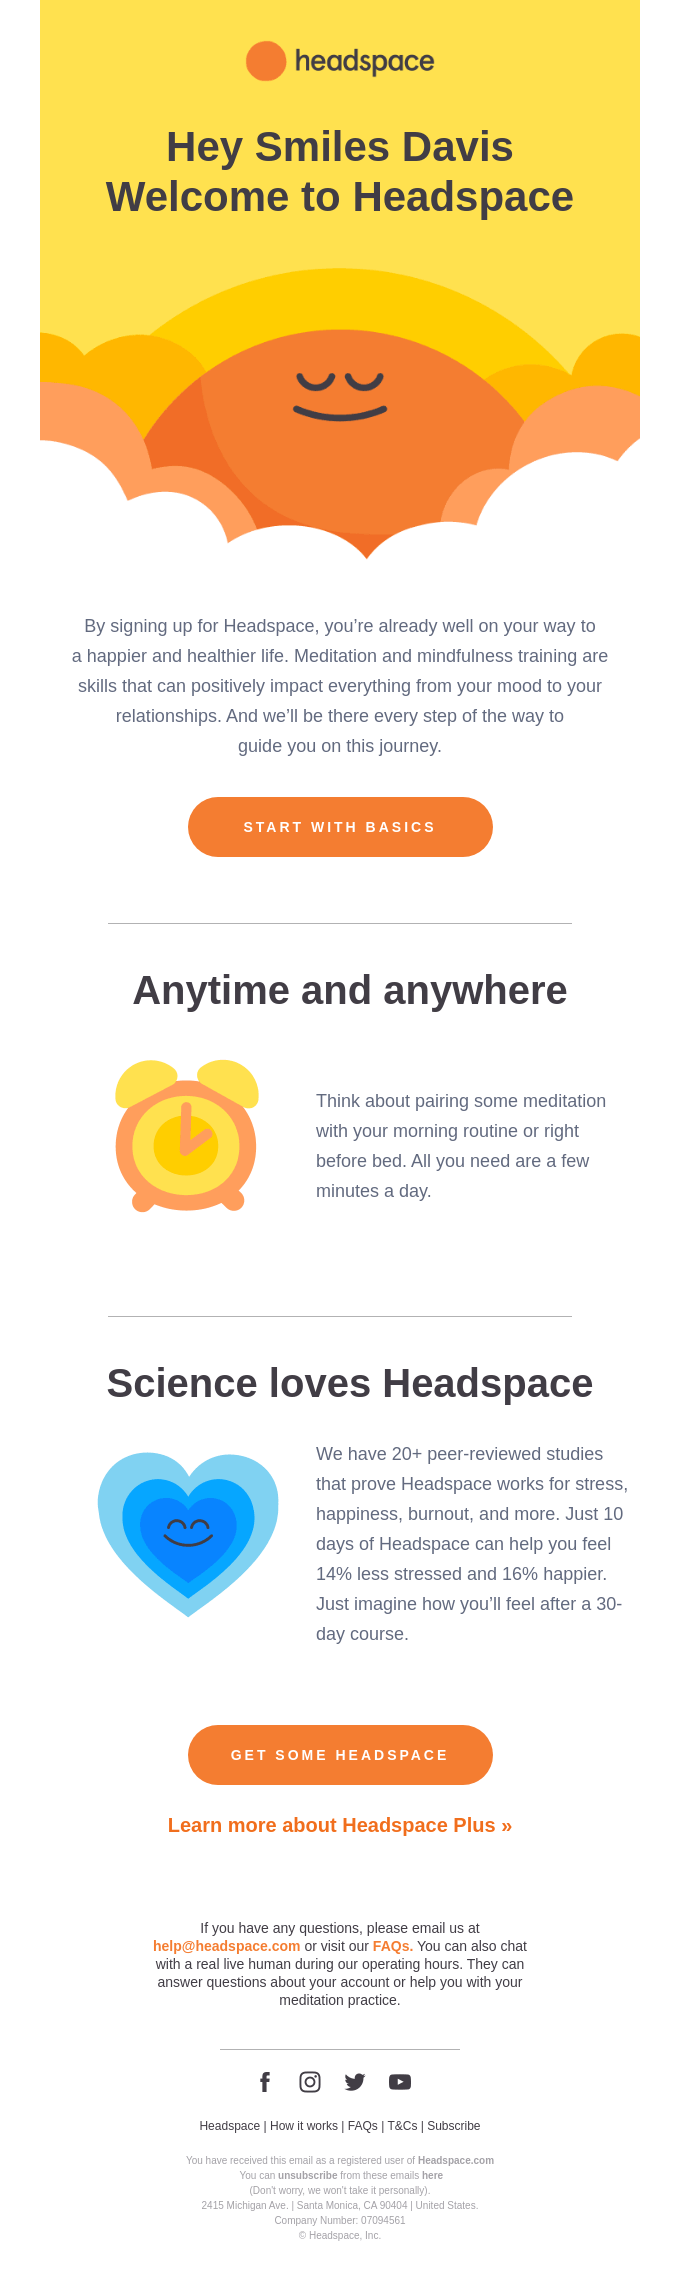 Headspace welcome email.